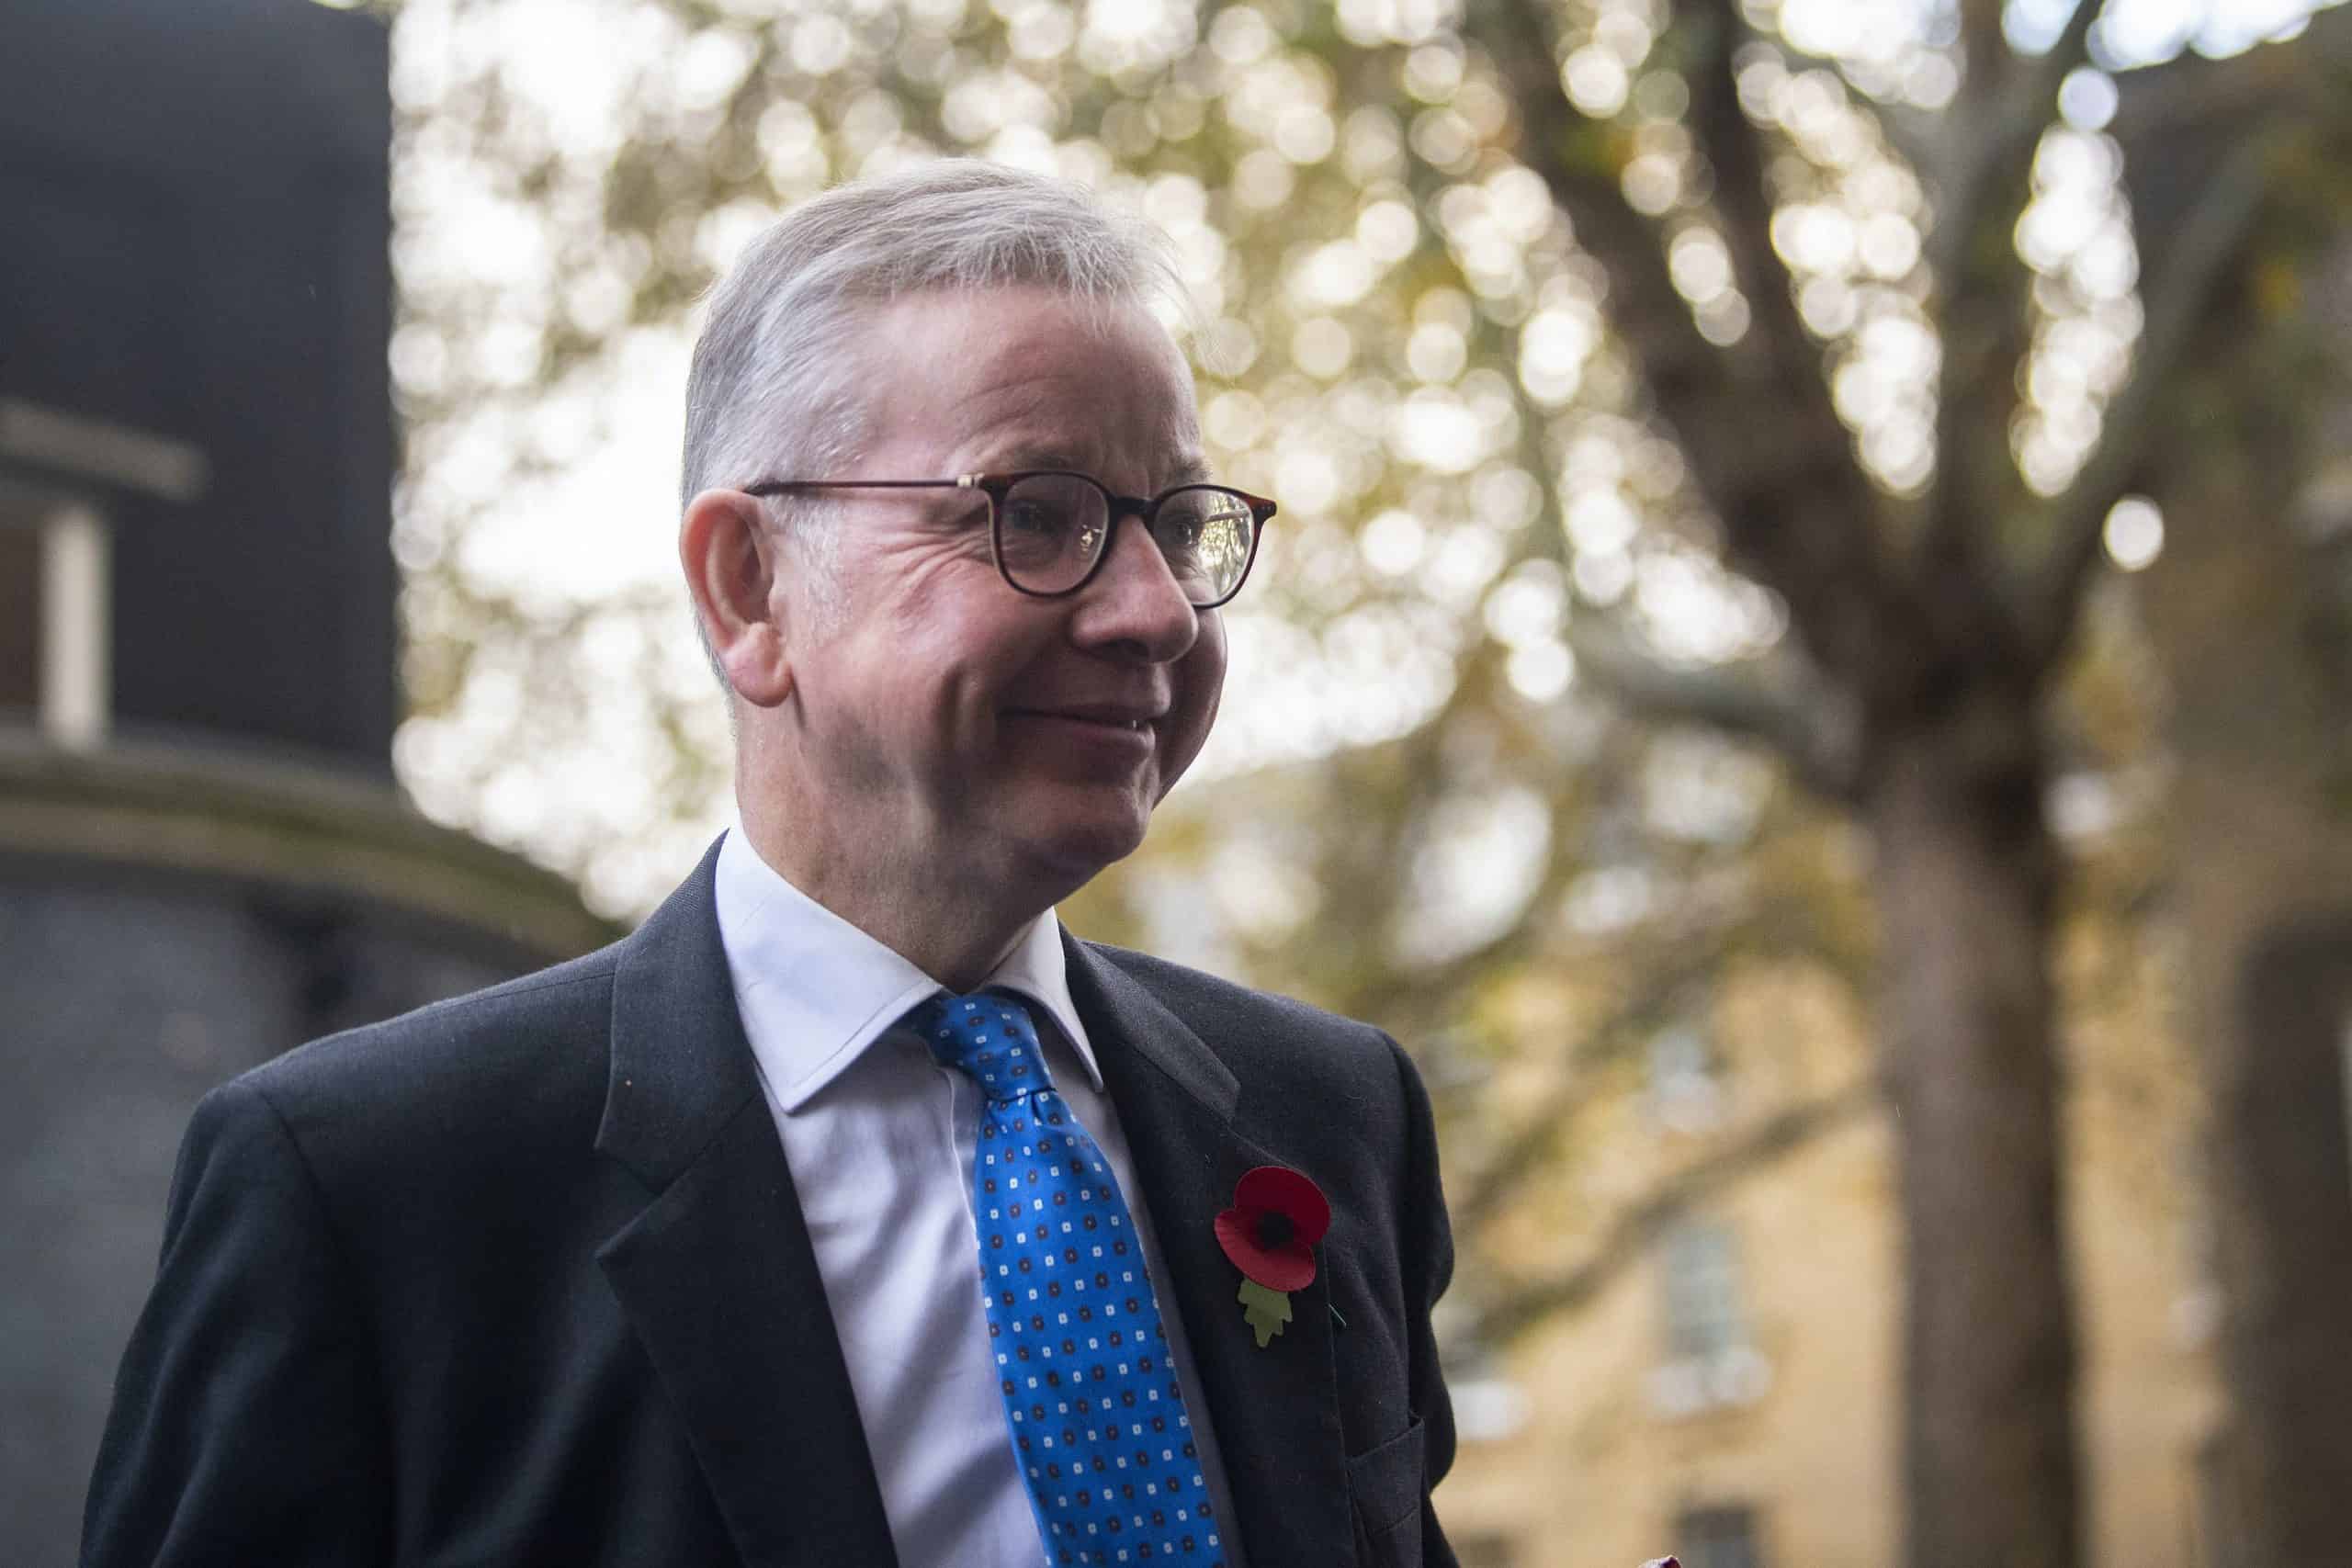 Gove blames EU ‘rules are rules’ approach for impending Brexit chaos